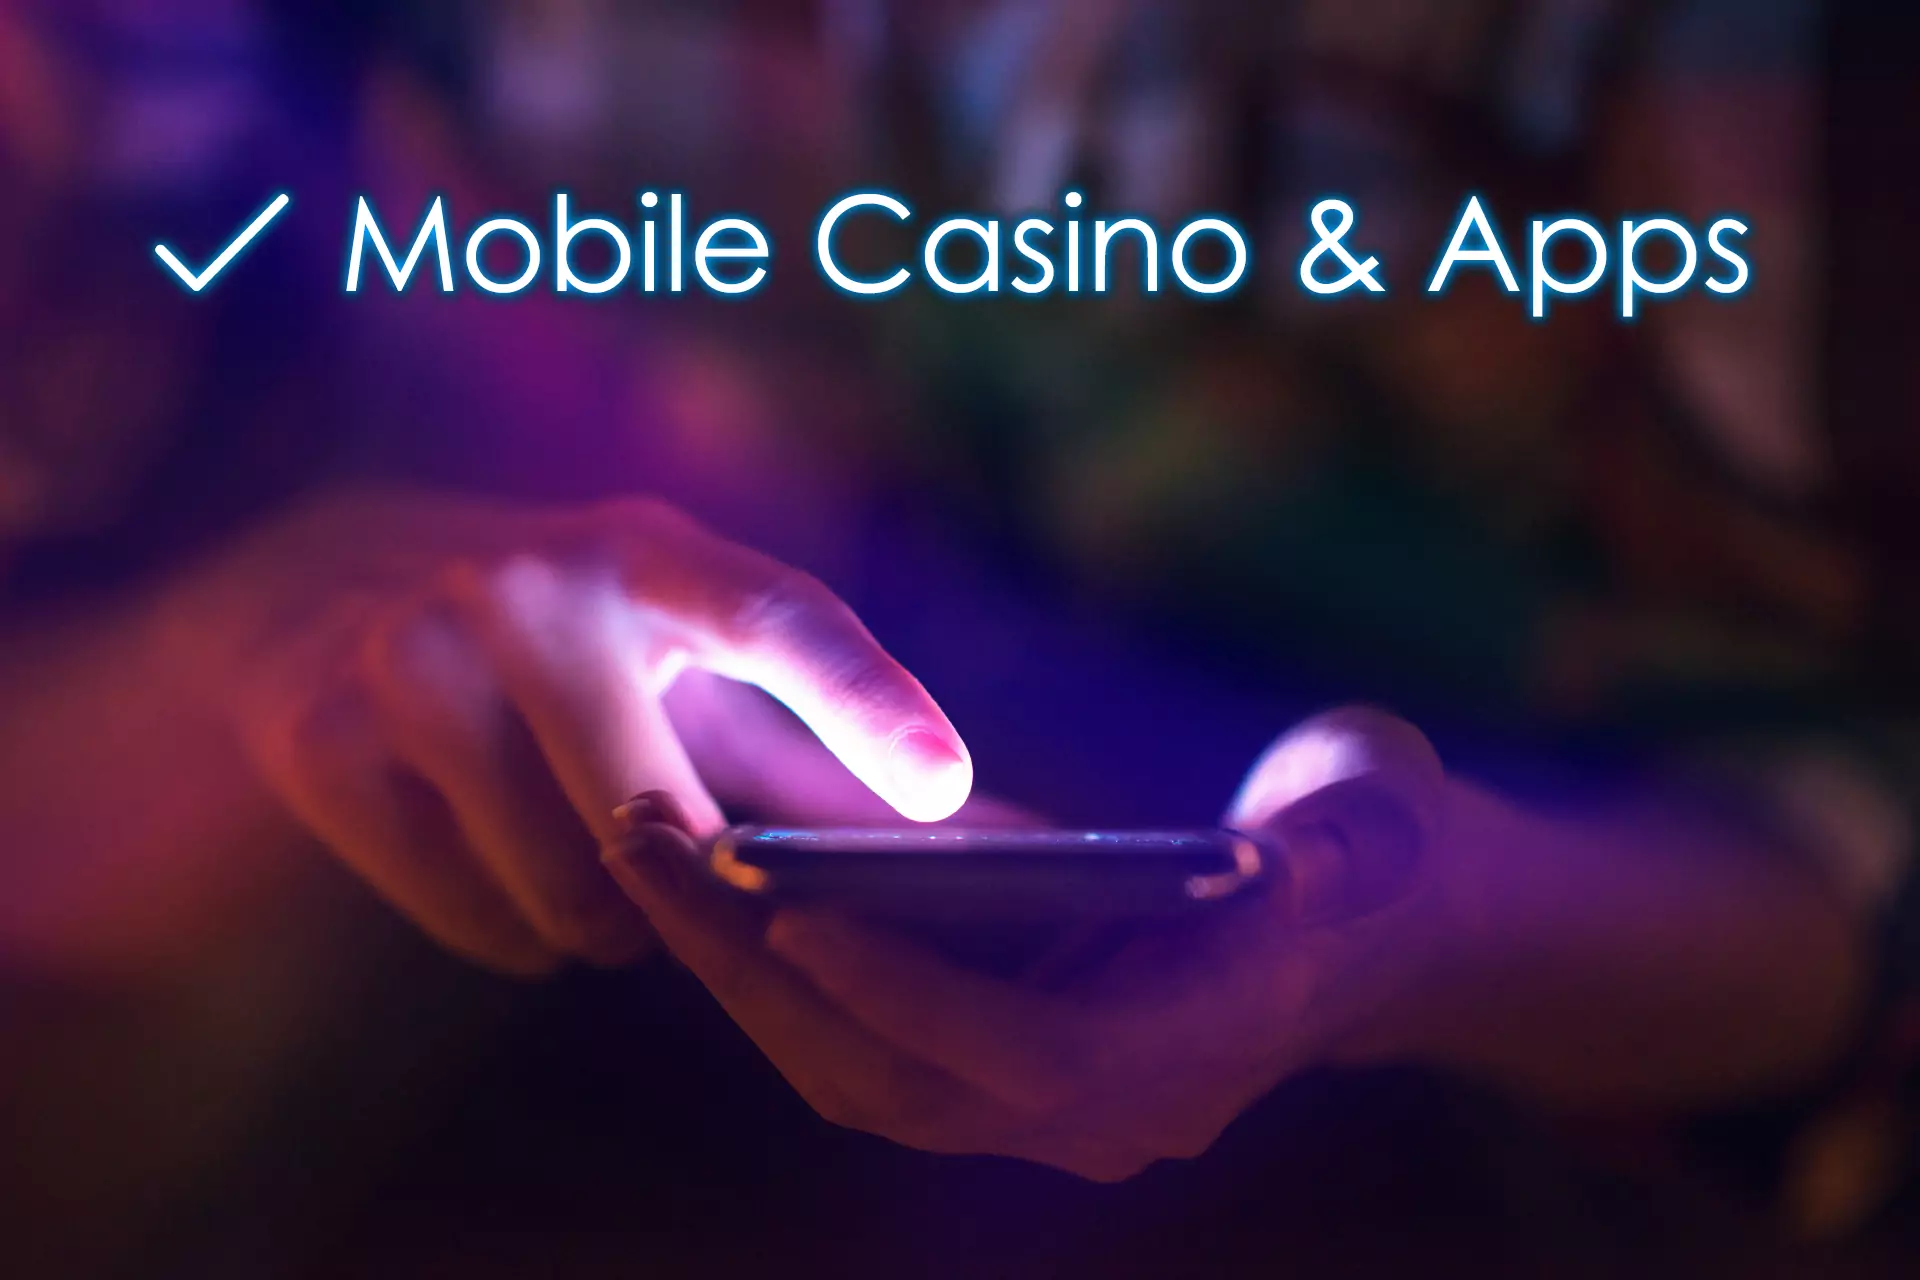 Most of the online casinos create Android and iOS apps to help users to play games from anywhere.